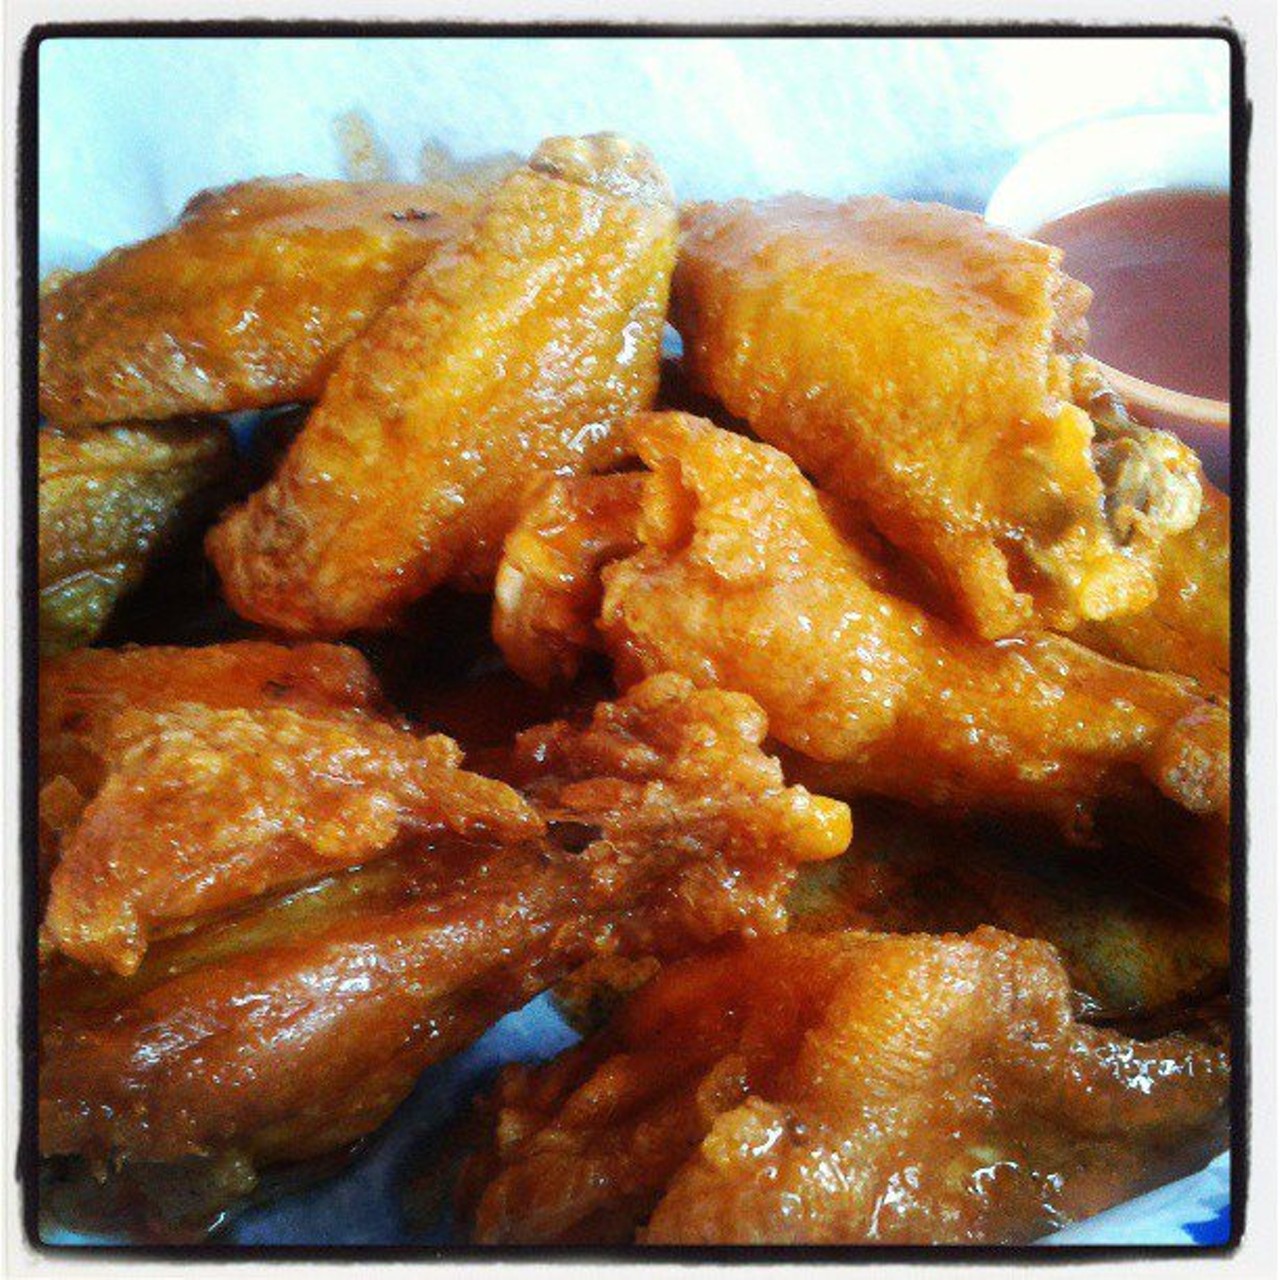 This Lakewood landmark is known for its great bar promotions, but they have also won awards for their deep fried wings. We recommend the black pepper dry rub. Around the Corner is located at 18616 Detroit Ave. Call (216) 521-4413 for more information.
Phot taken from FB